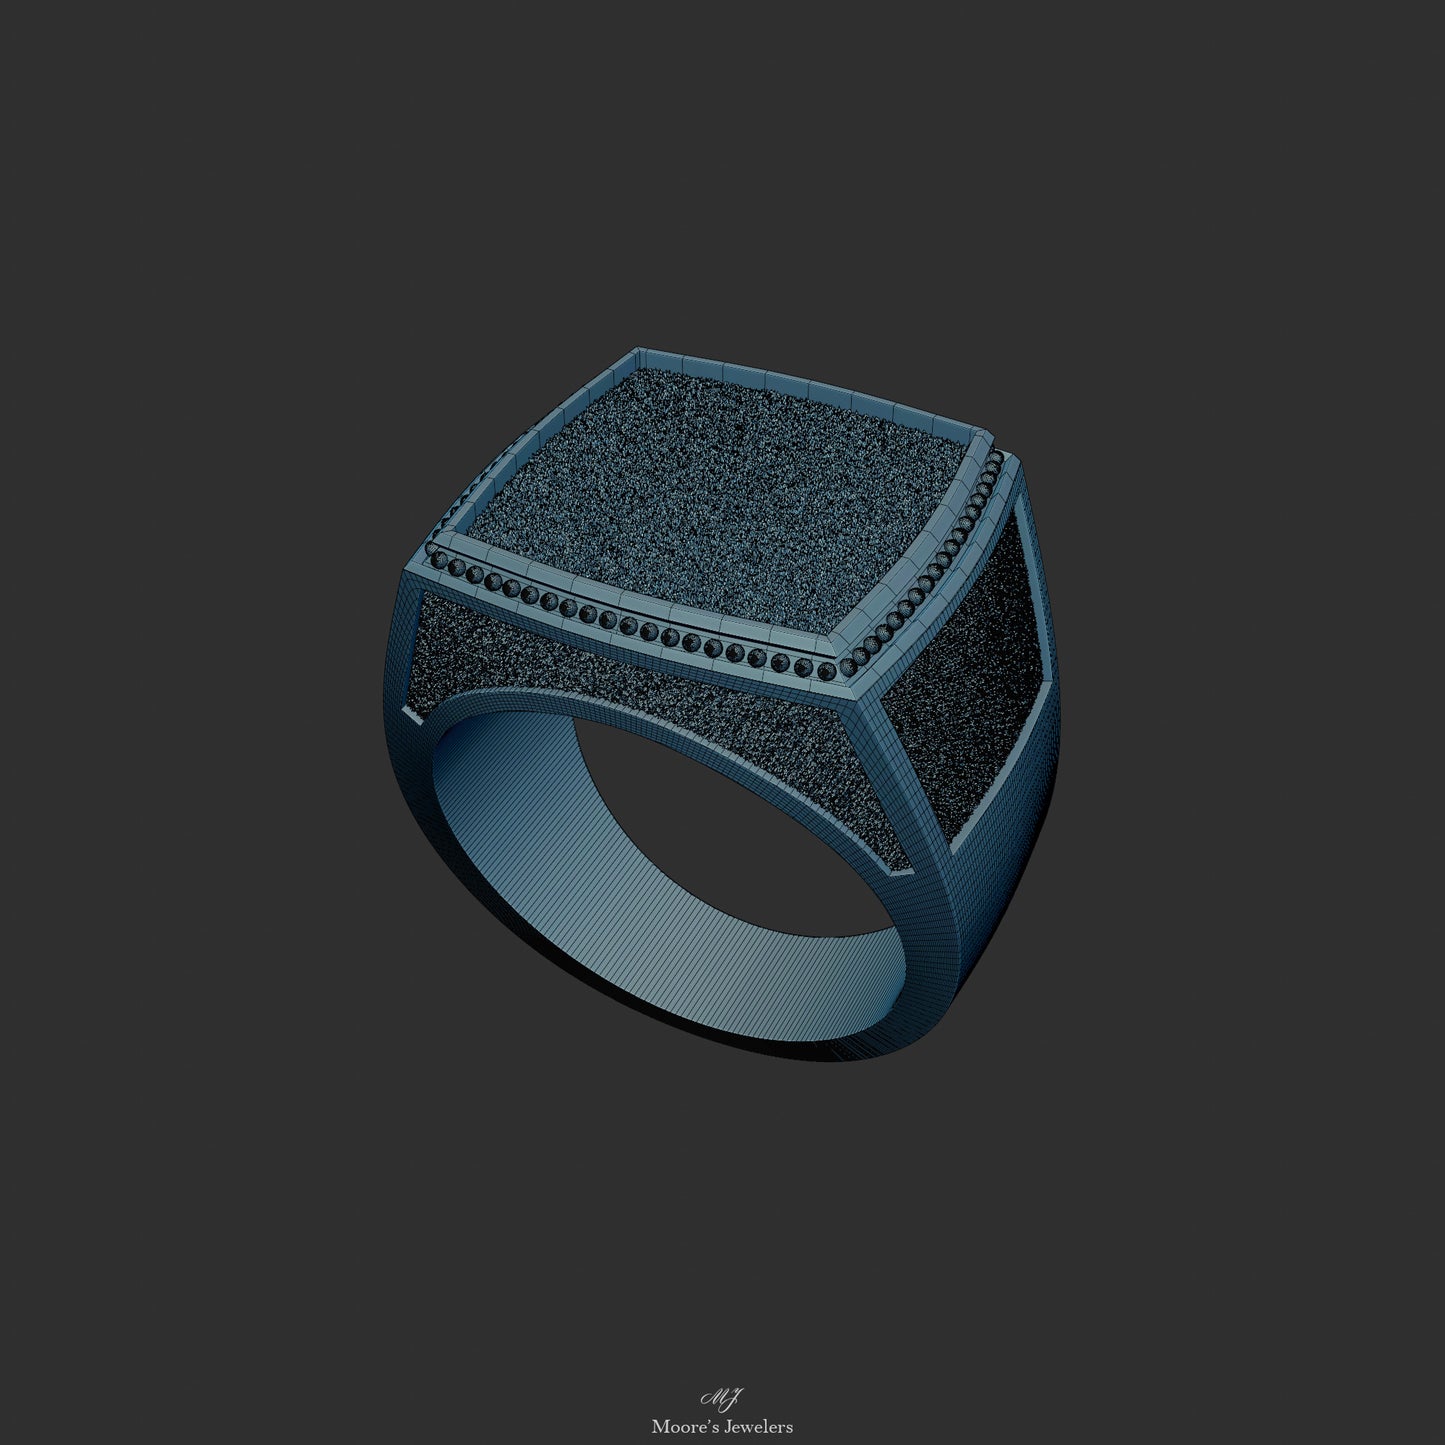 Textured Signet or Class Ring Shank 3d Model (STL FIle Only)